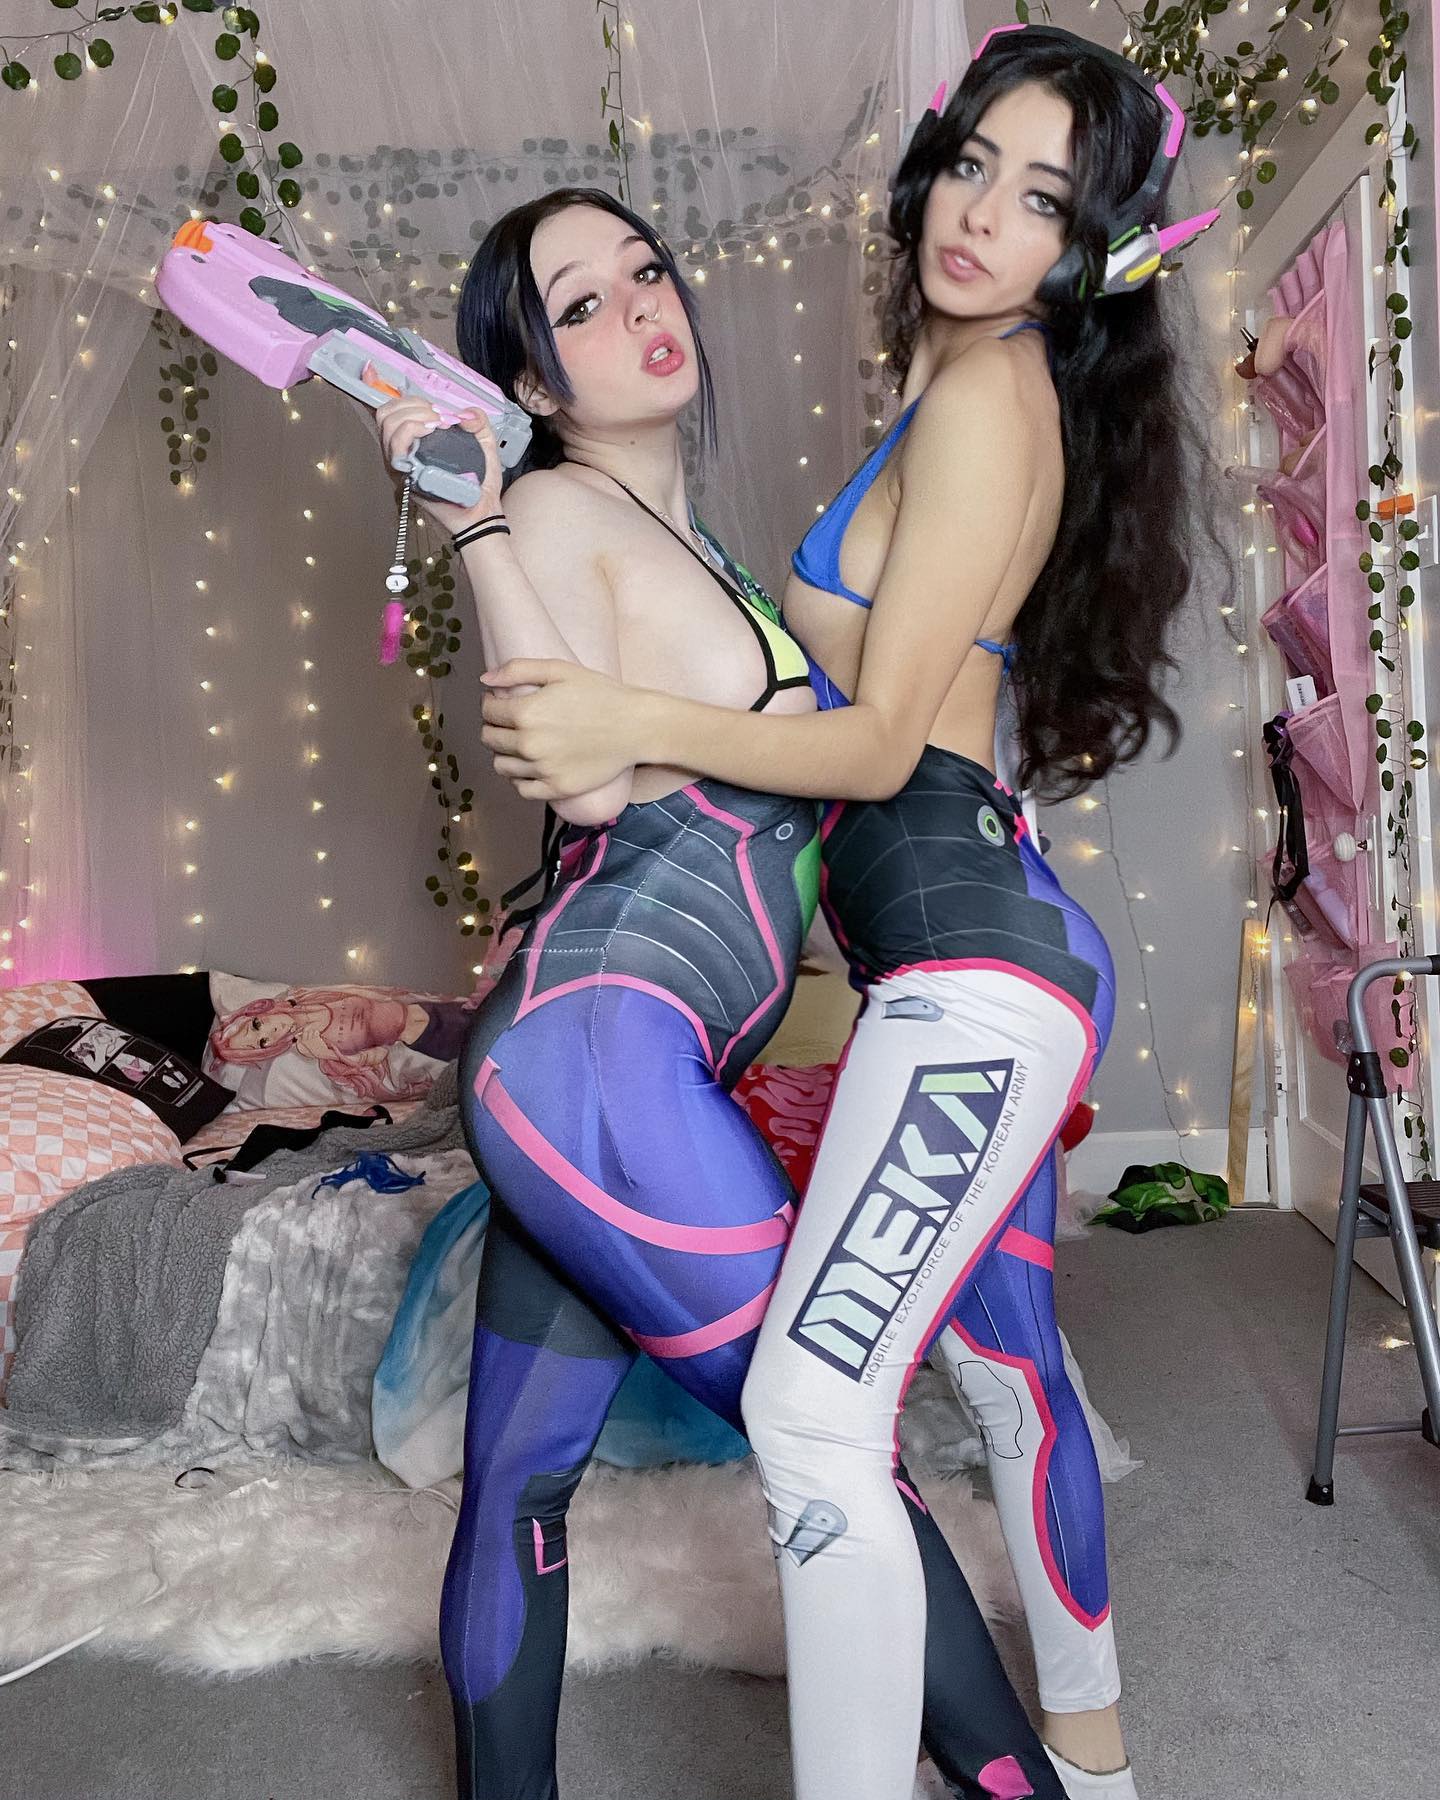 Good thing we brought an umbrella (our eyelashes) for all the ppl seeing this 🙈🖤

#dva #cosplays #overwatch #gamergirls #collab